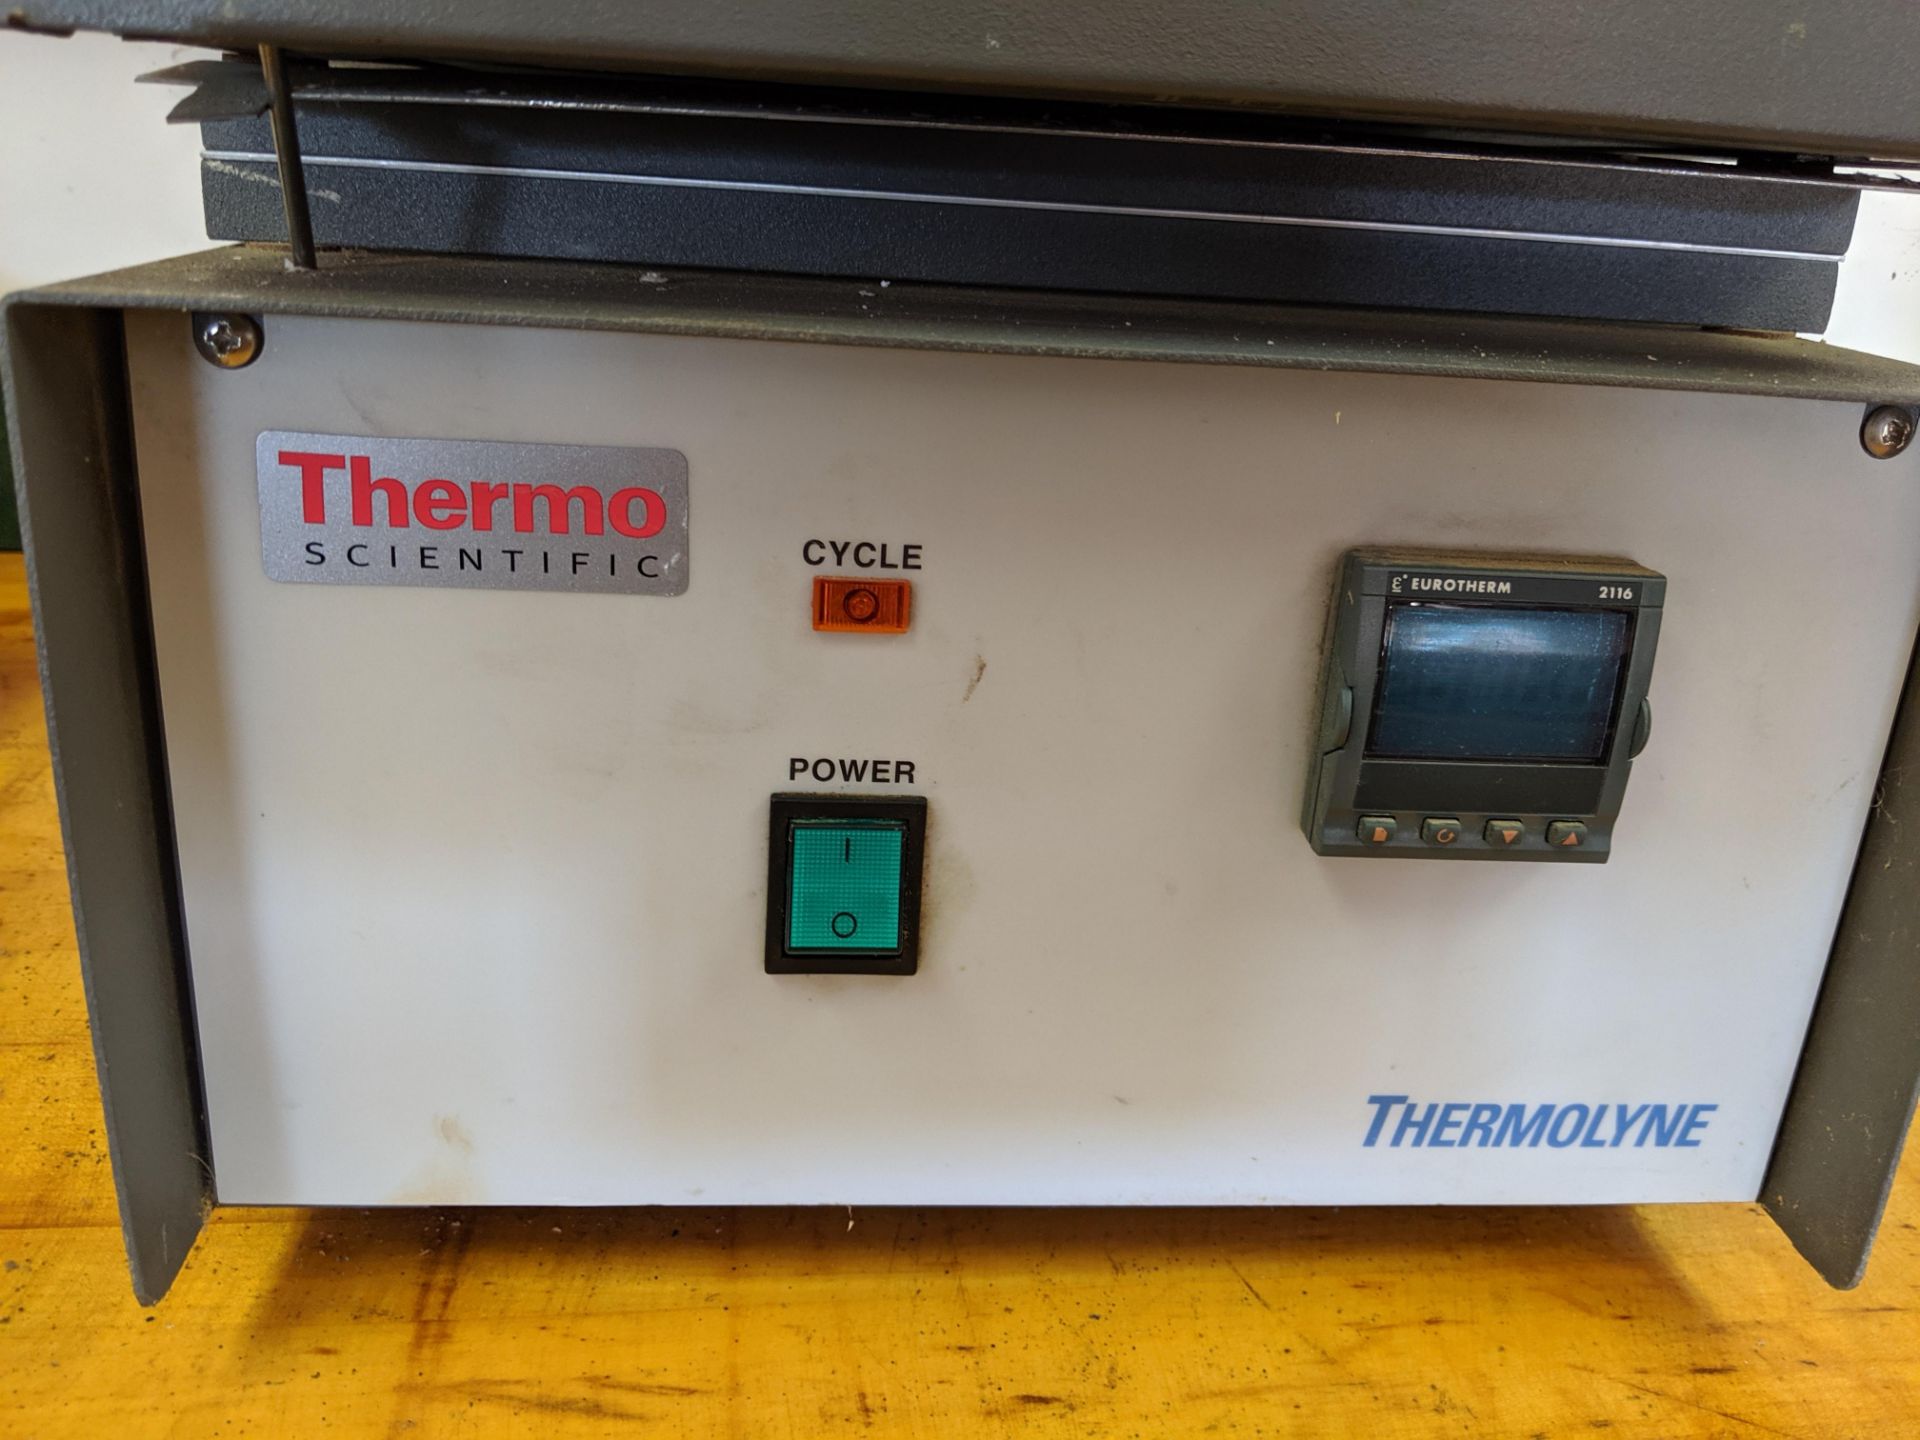 Thermolyne Thermo Scientific Model F47915 Lab Oven, 110 Volt - Image 2 of 5